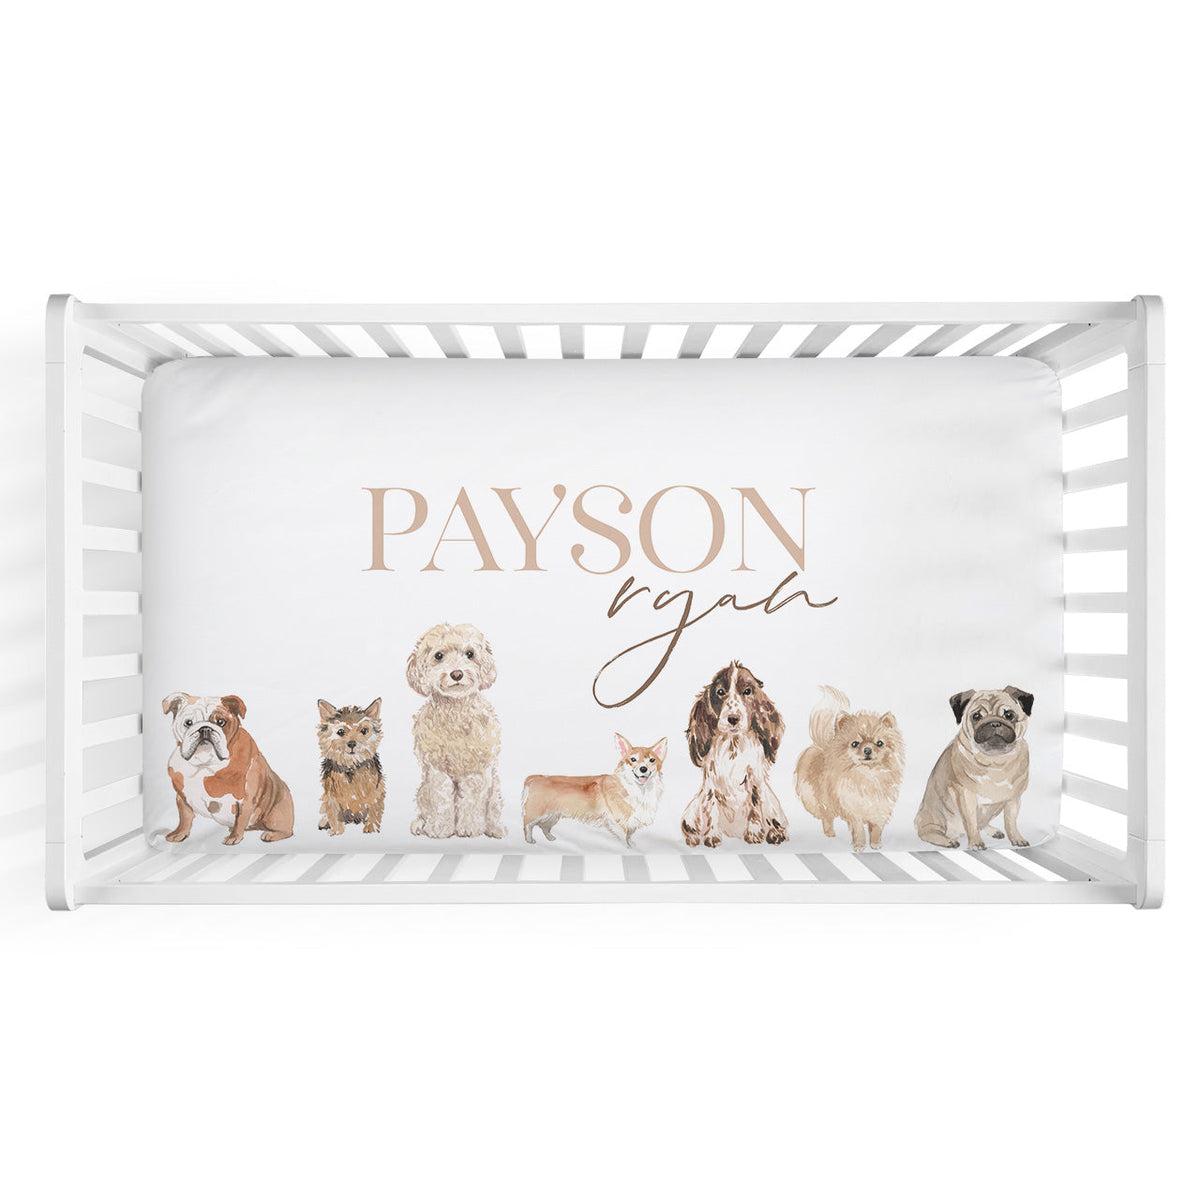 Puppy Love Personalized Crib Sheet